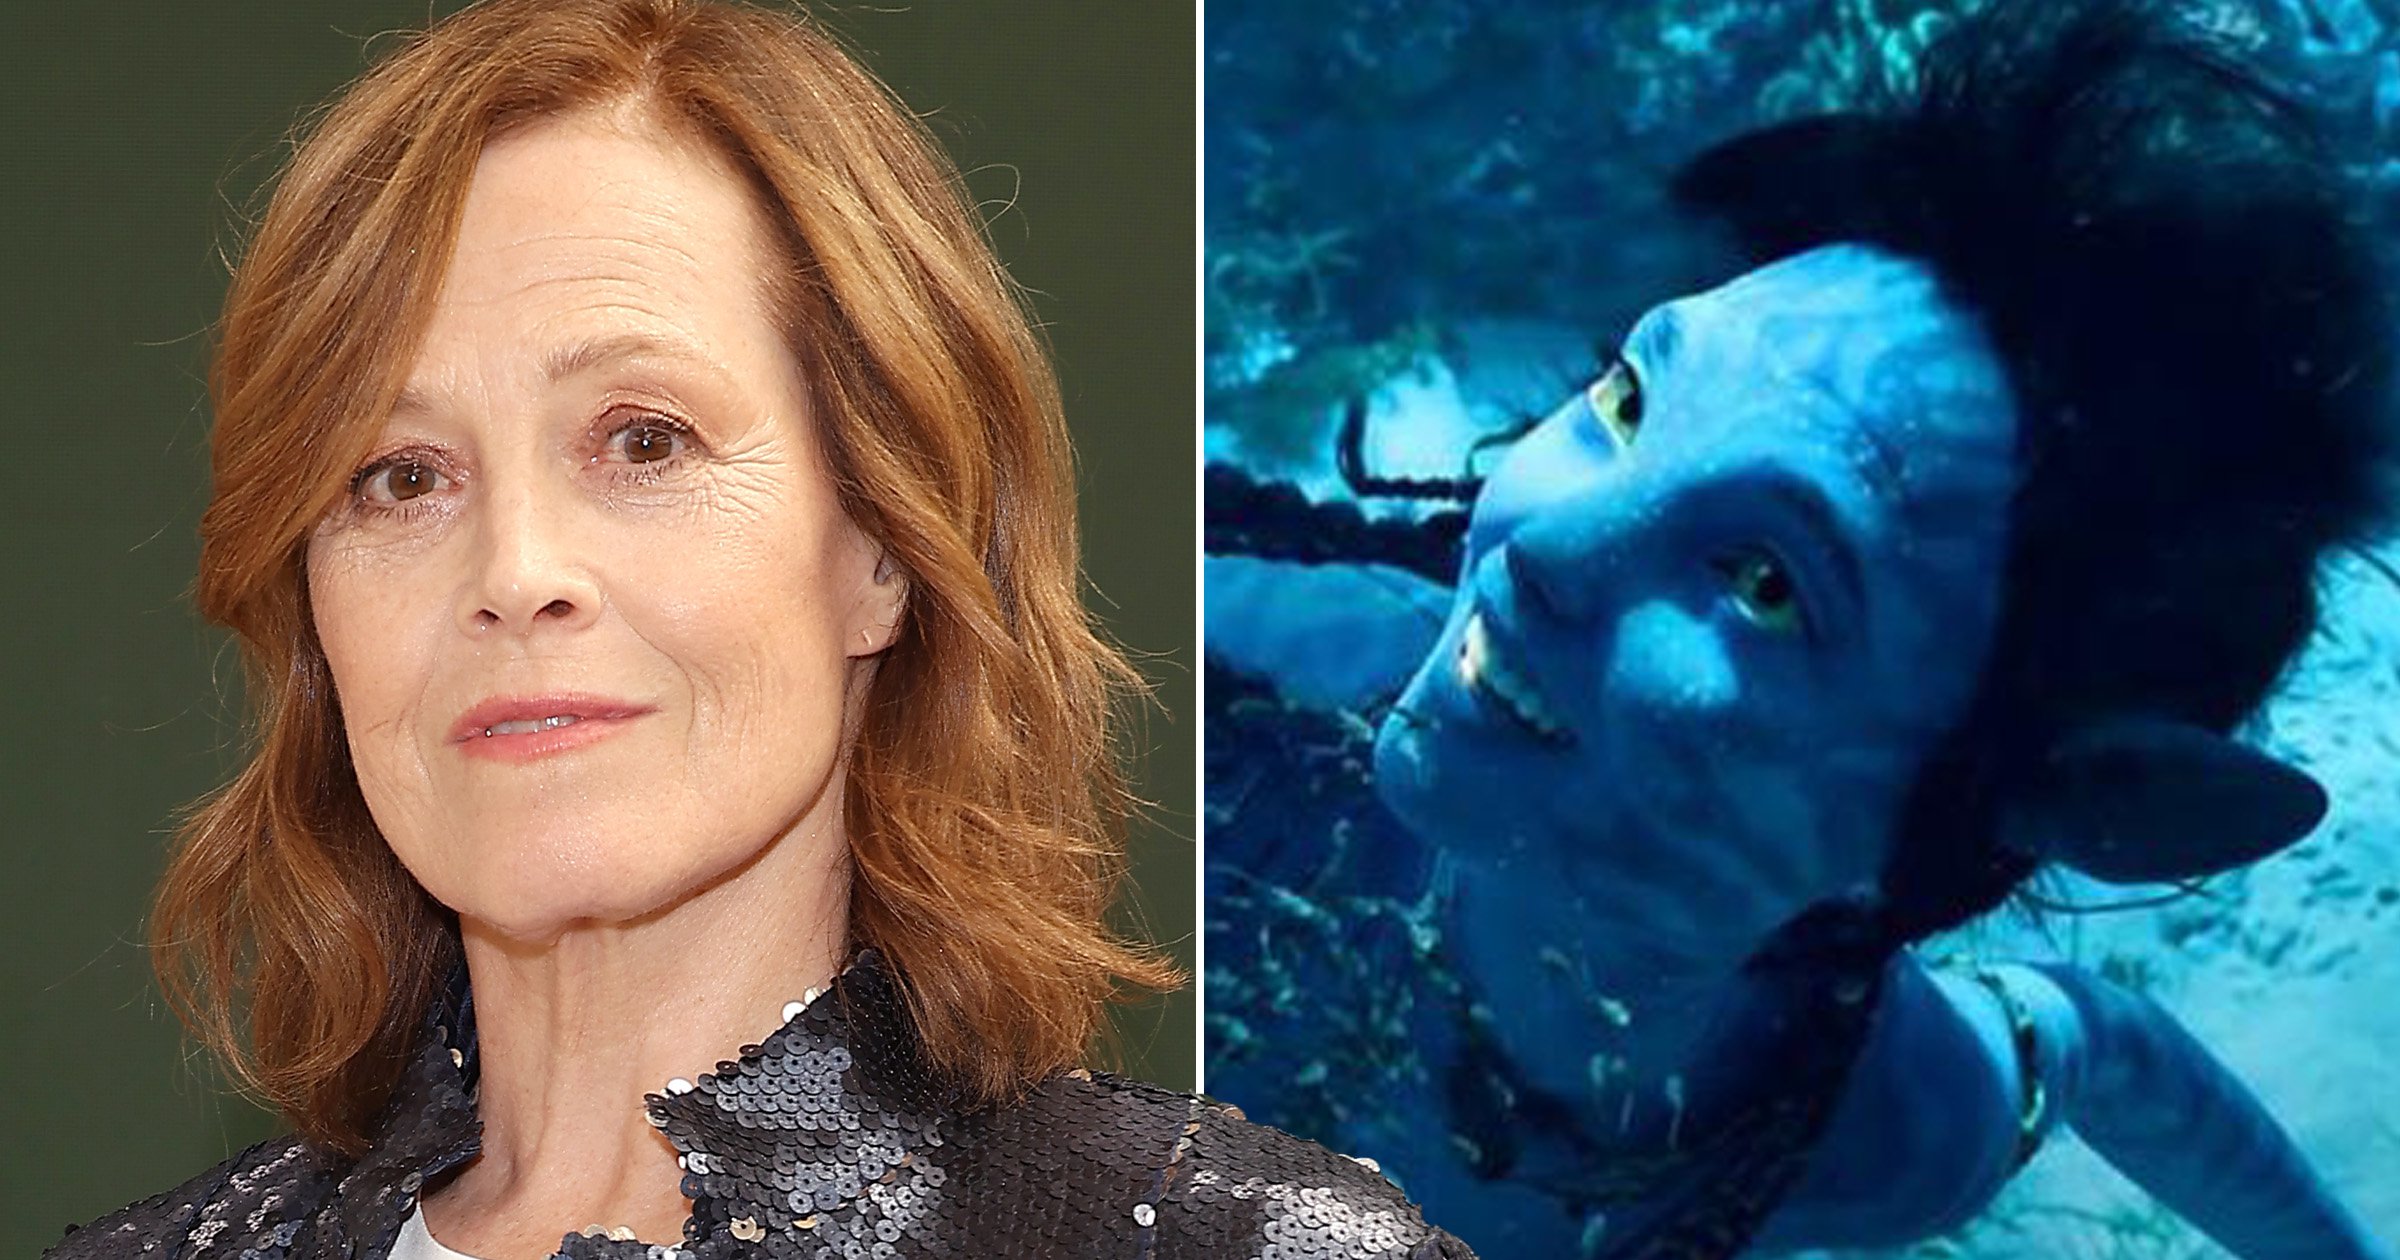 Sigourney Weaver, 72, to play teenager in Avatar 2 – and hung out with teen girls to prepare for role